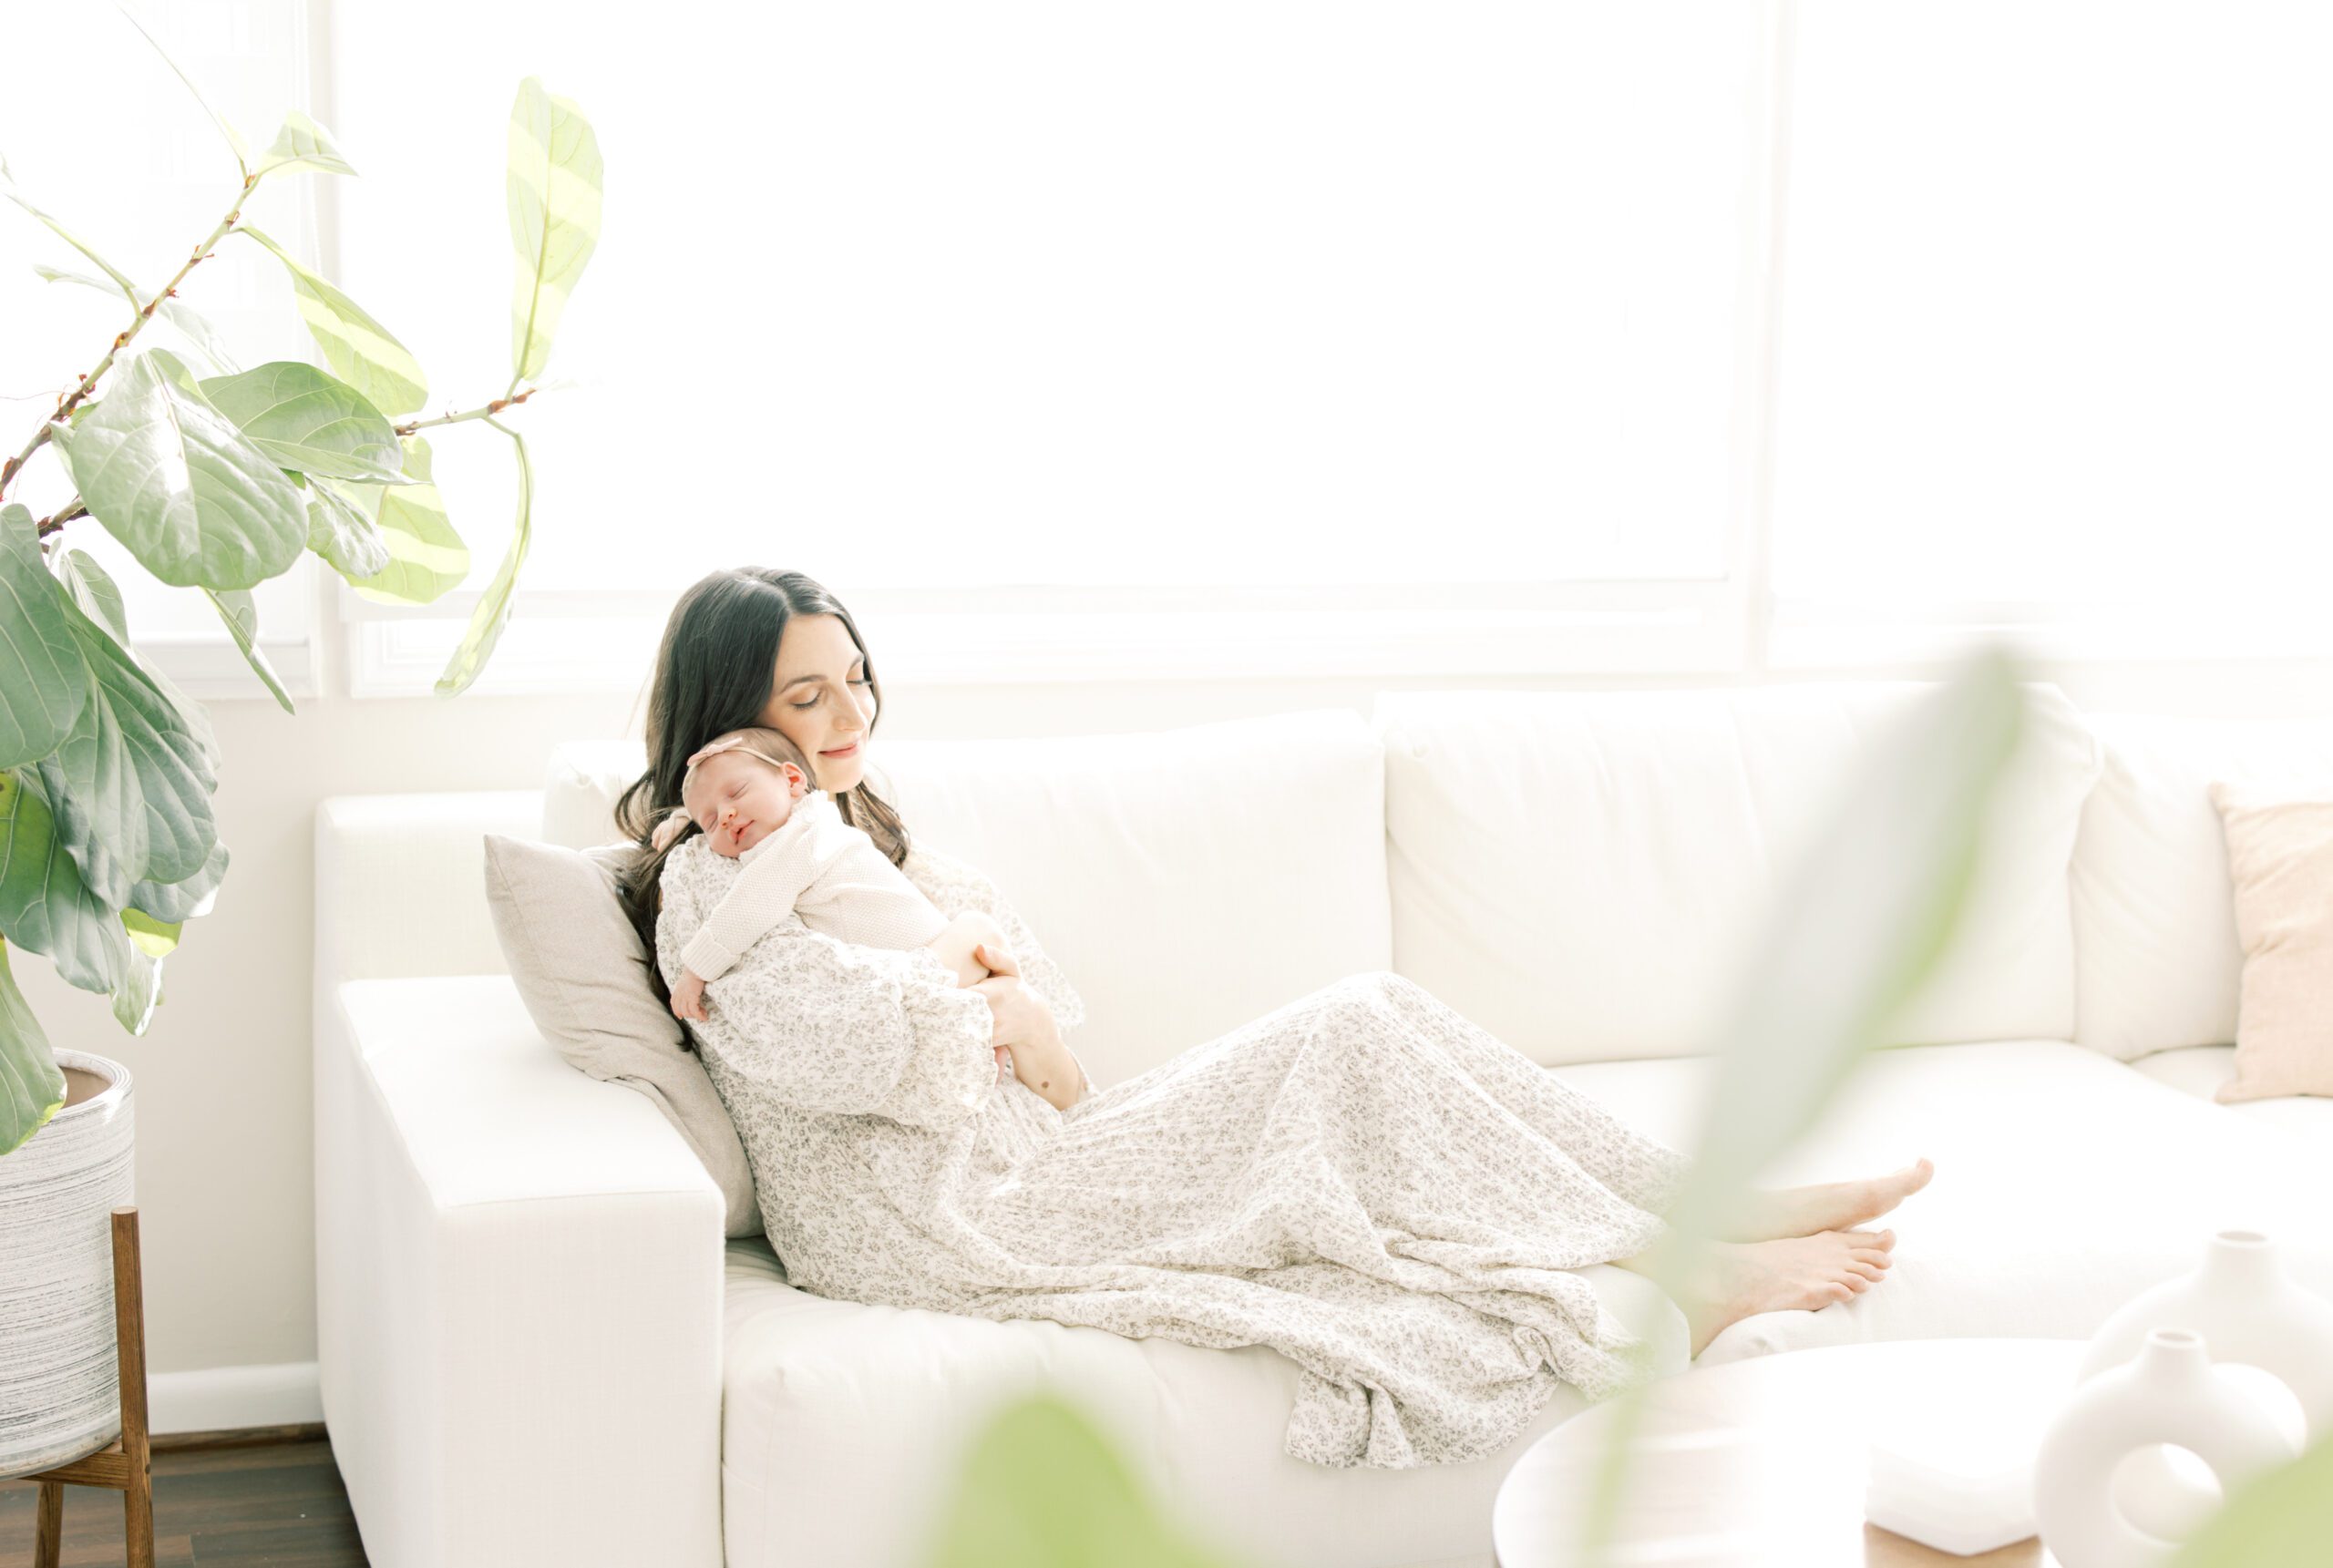 Mom relaxing on couch snuggling her newborn baby